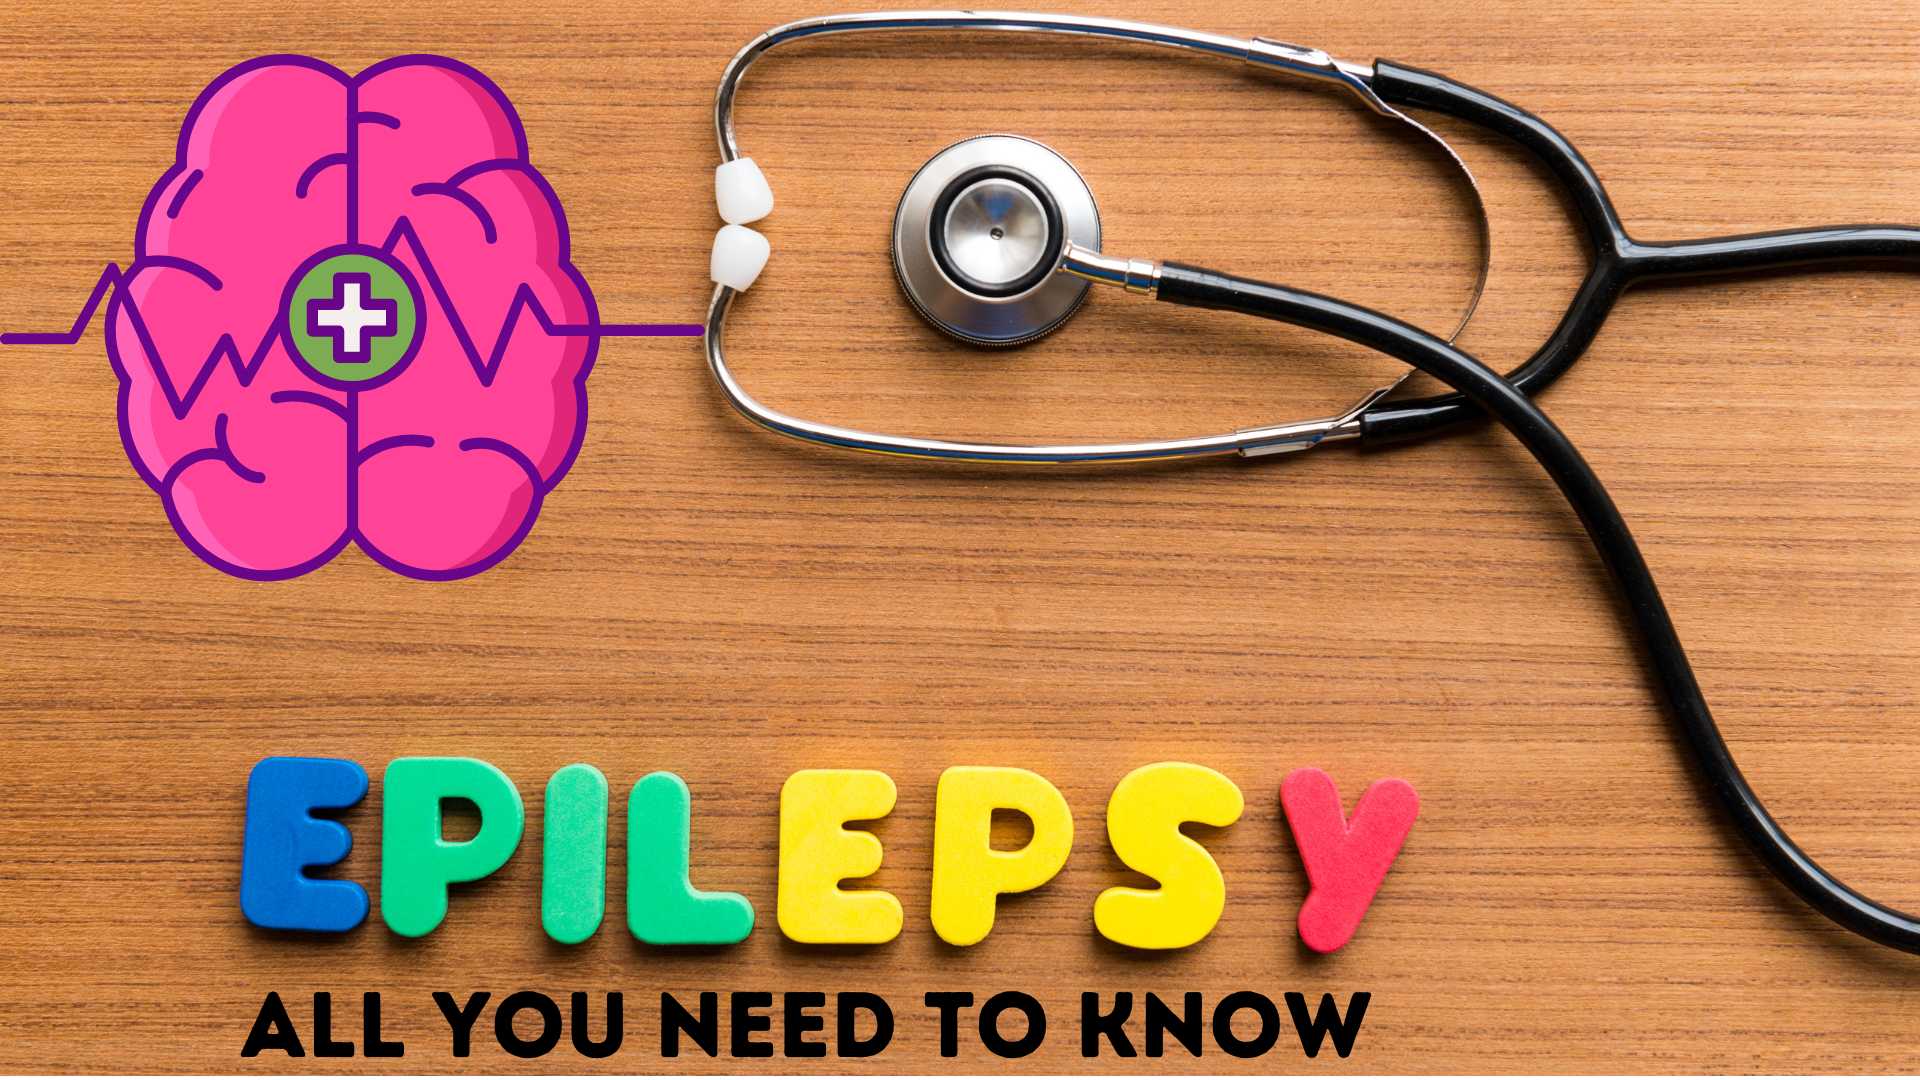 Epilepsy all you need to Know